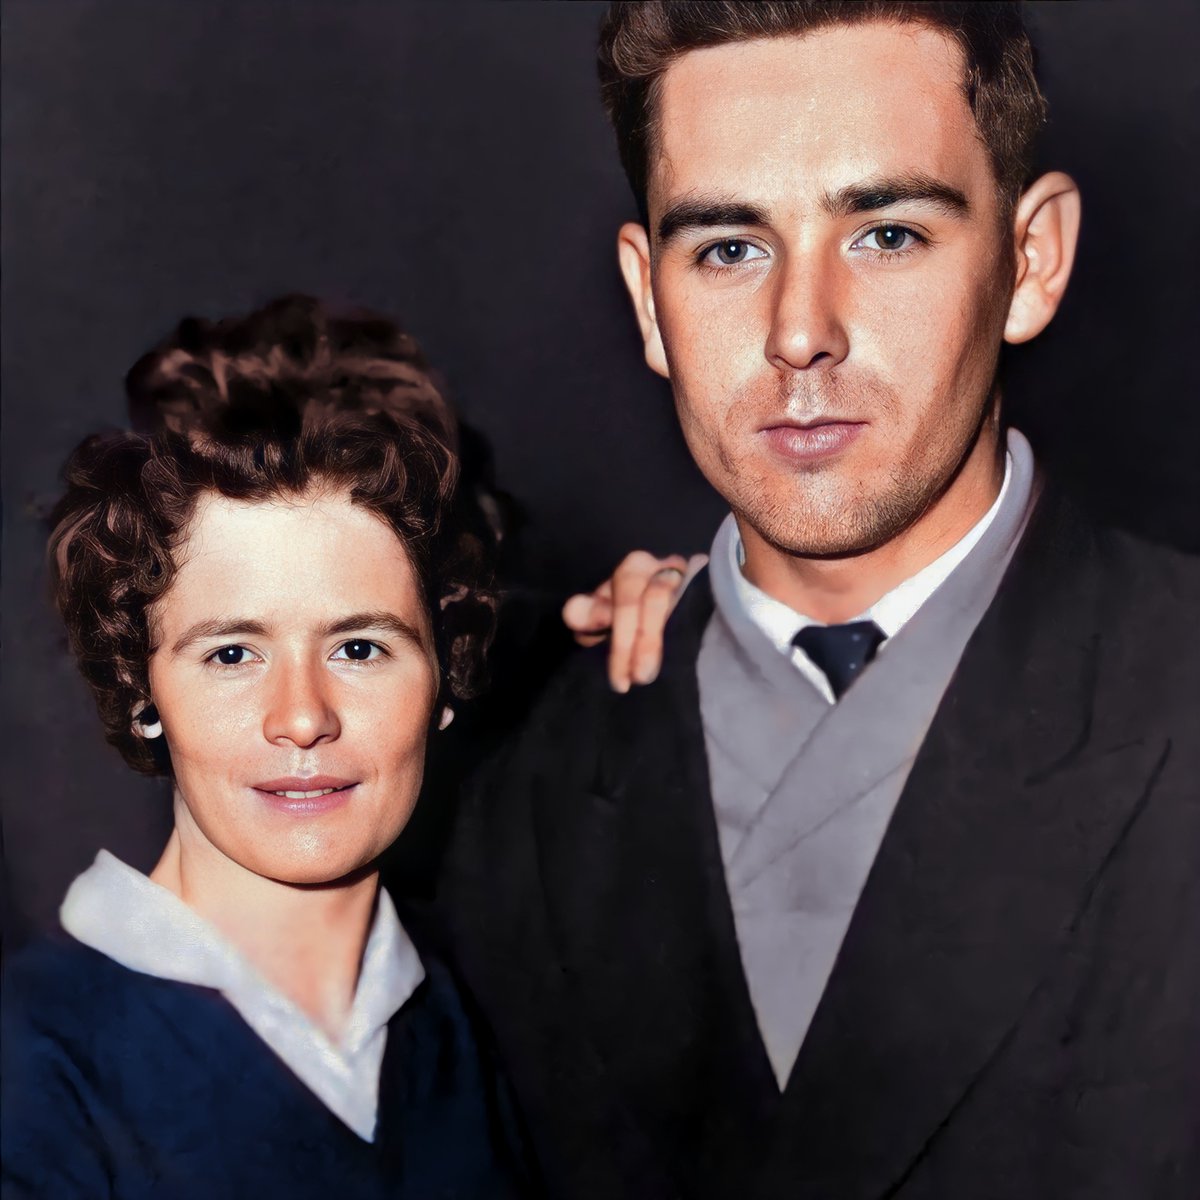 c.1960, Betty & Paddy Betty Walsh (née Hannigan) stands beside Paddy Walsh in their engagement photo. Hopeful gazes, snappy attire capture the beginning of a lifetime together. My Aunt Betty sadly passed earlier this year. RIP. 📷 Private Collection #Waterford #Colourised